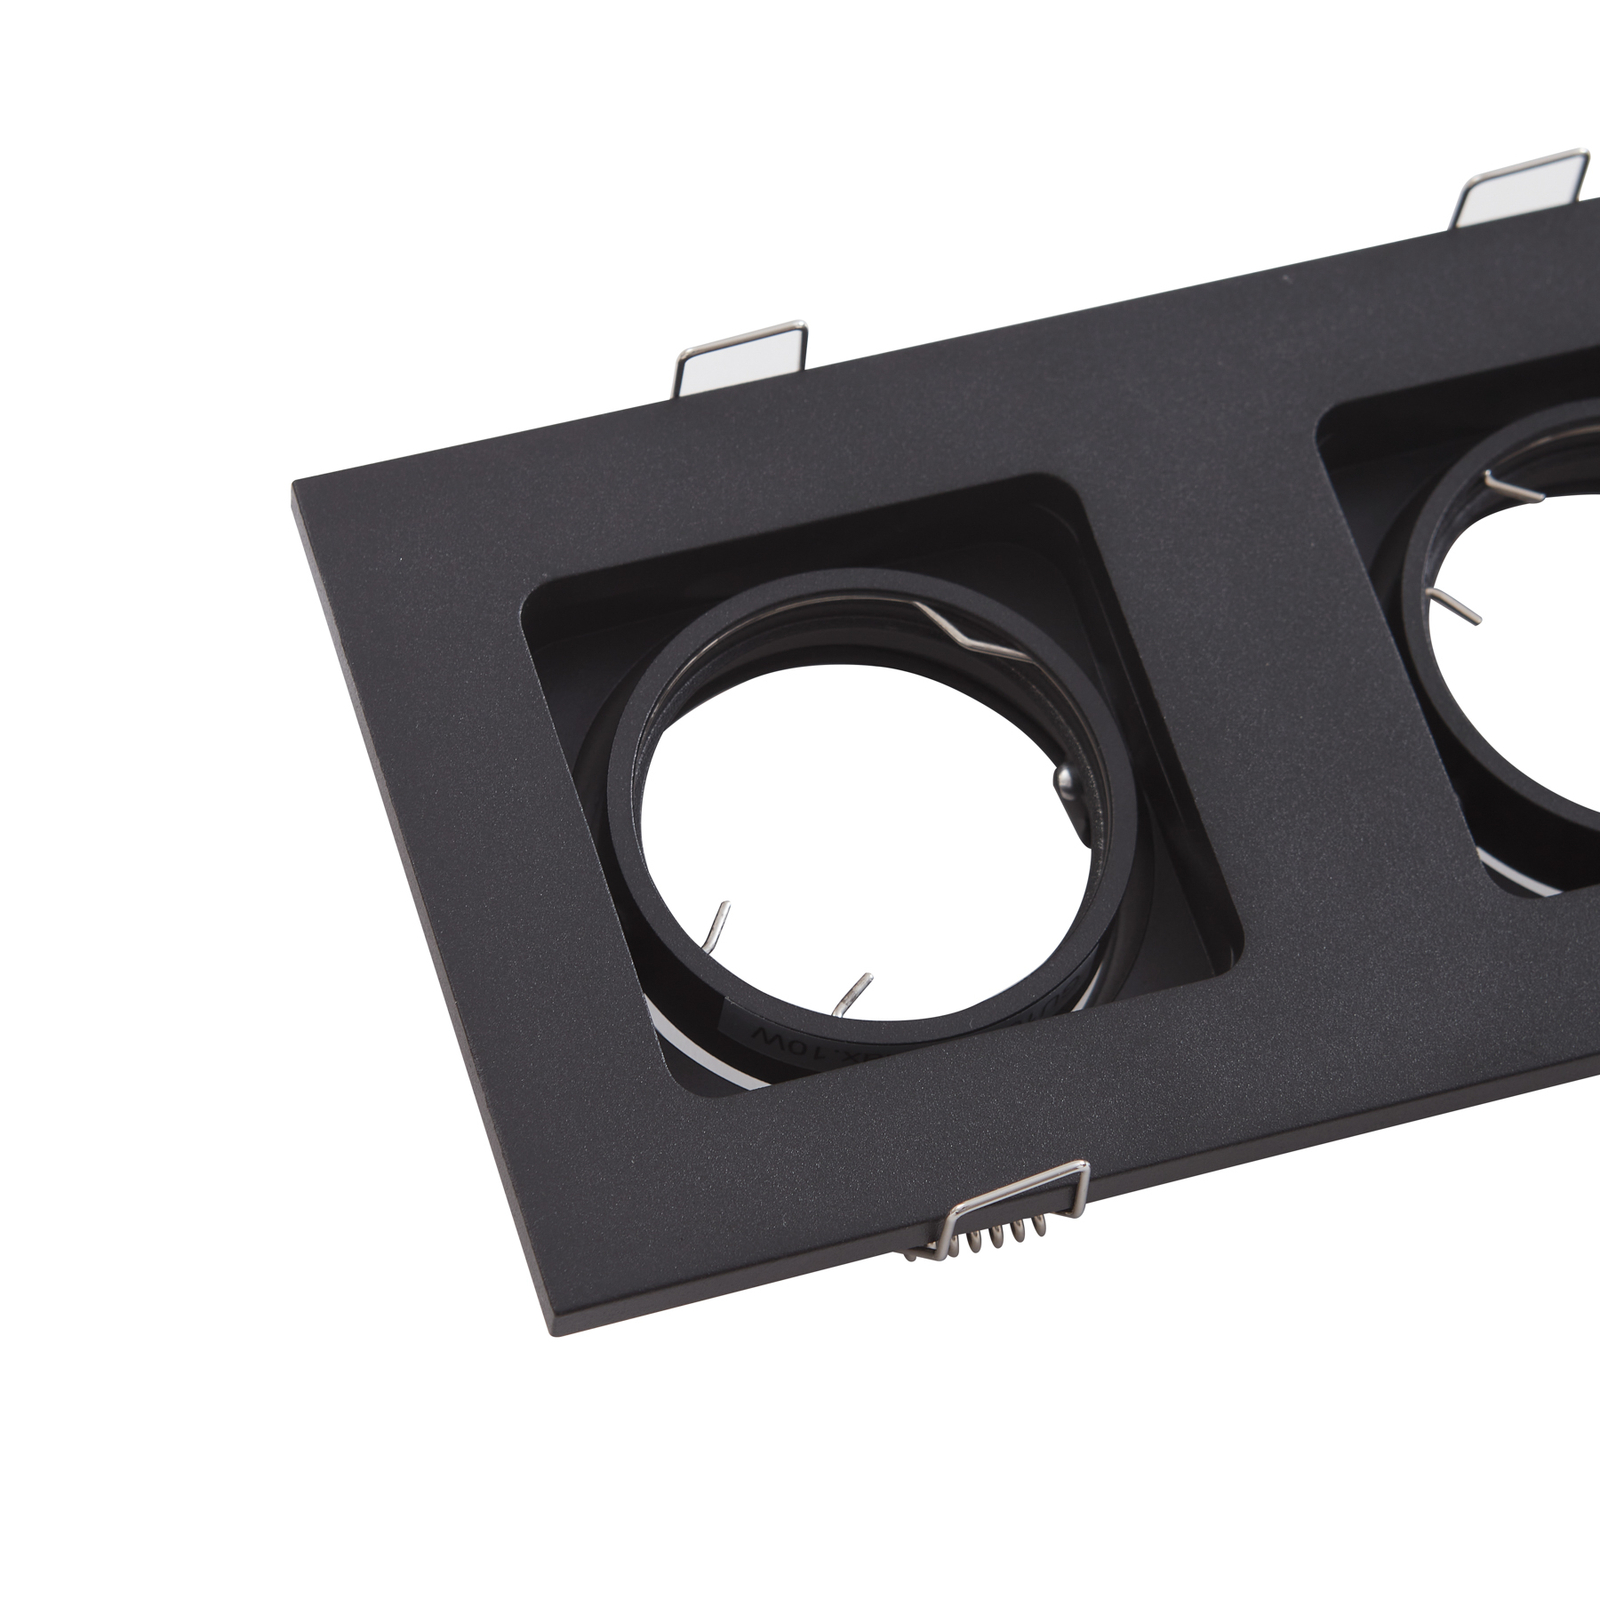 Lindby Thorid downlight, negro, 2 luces